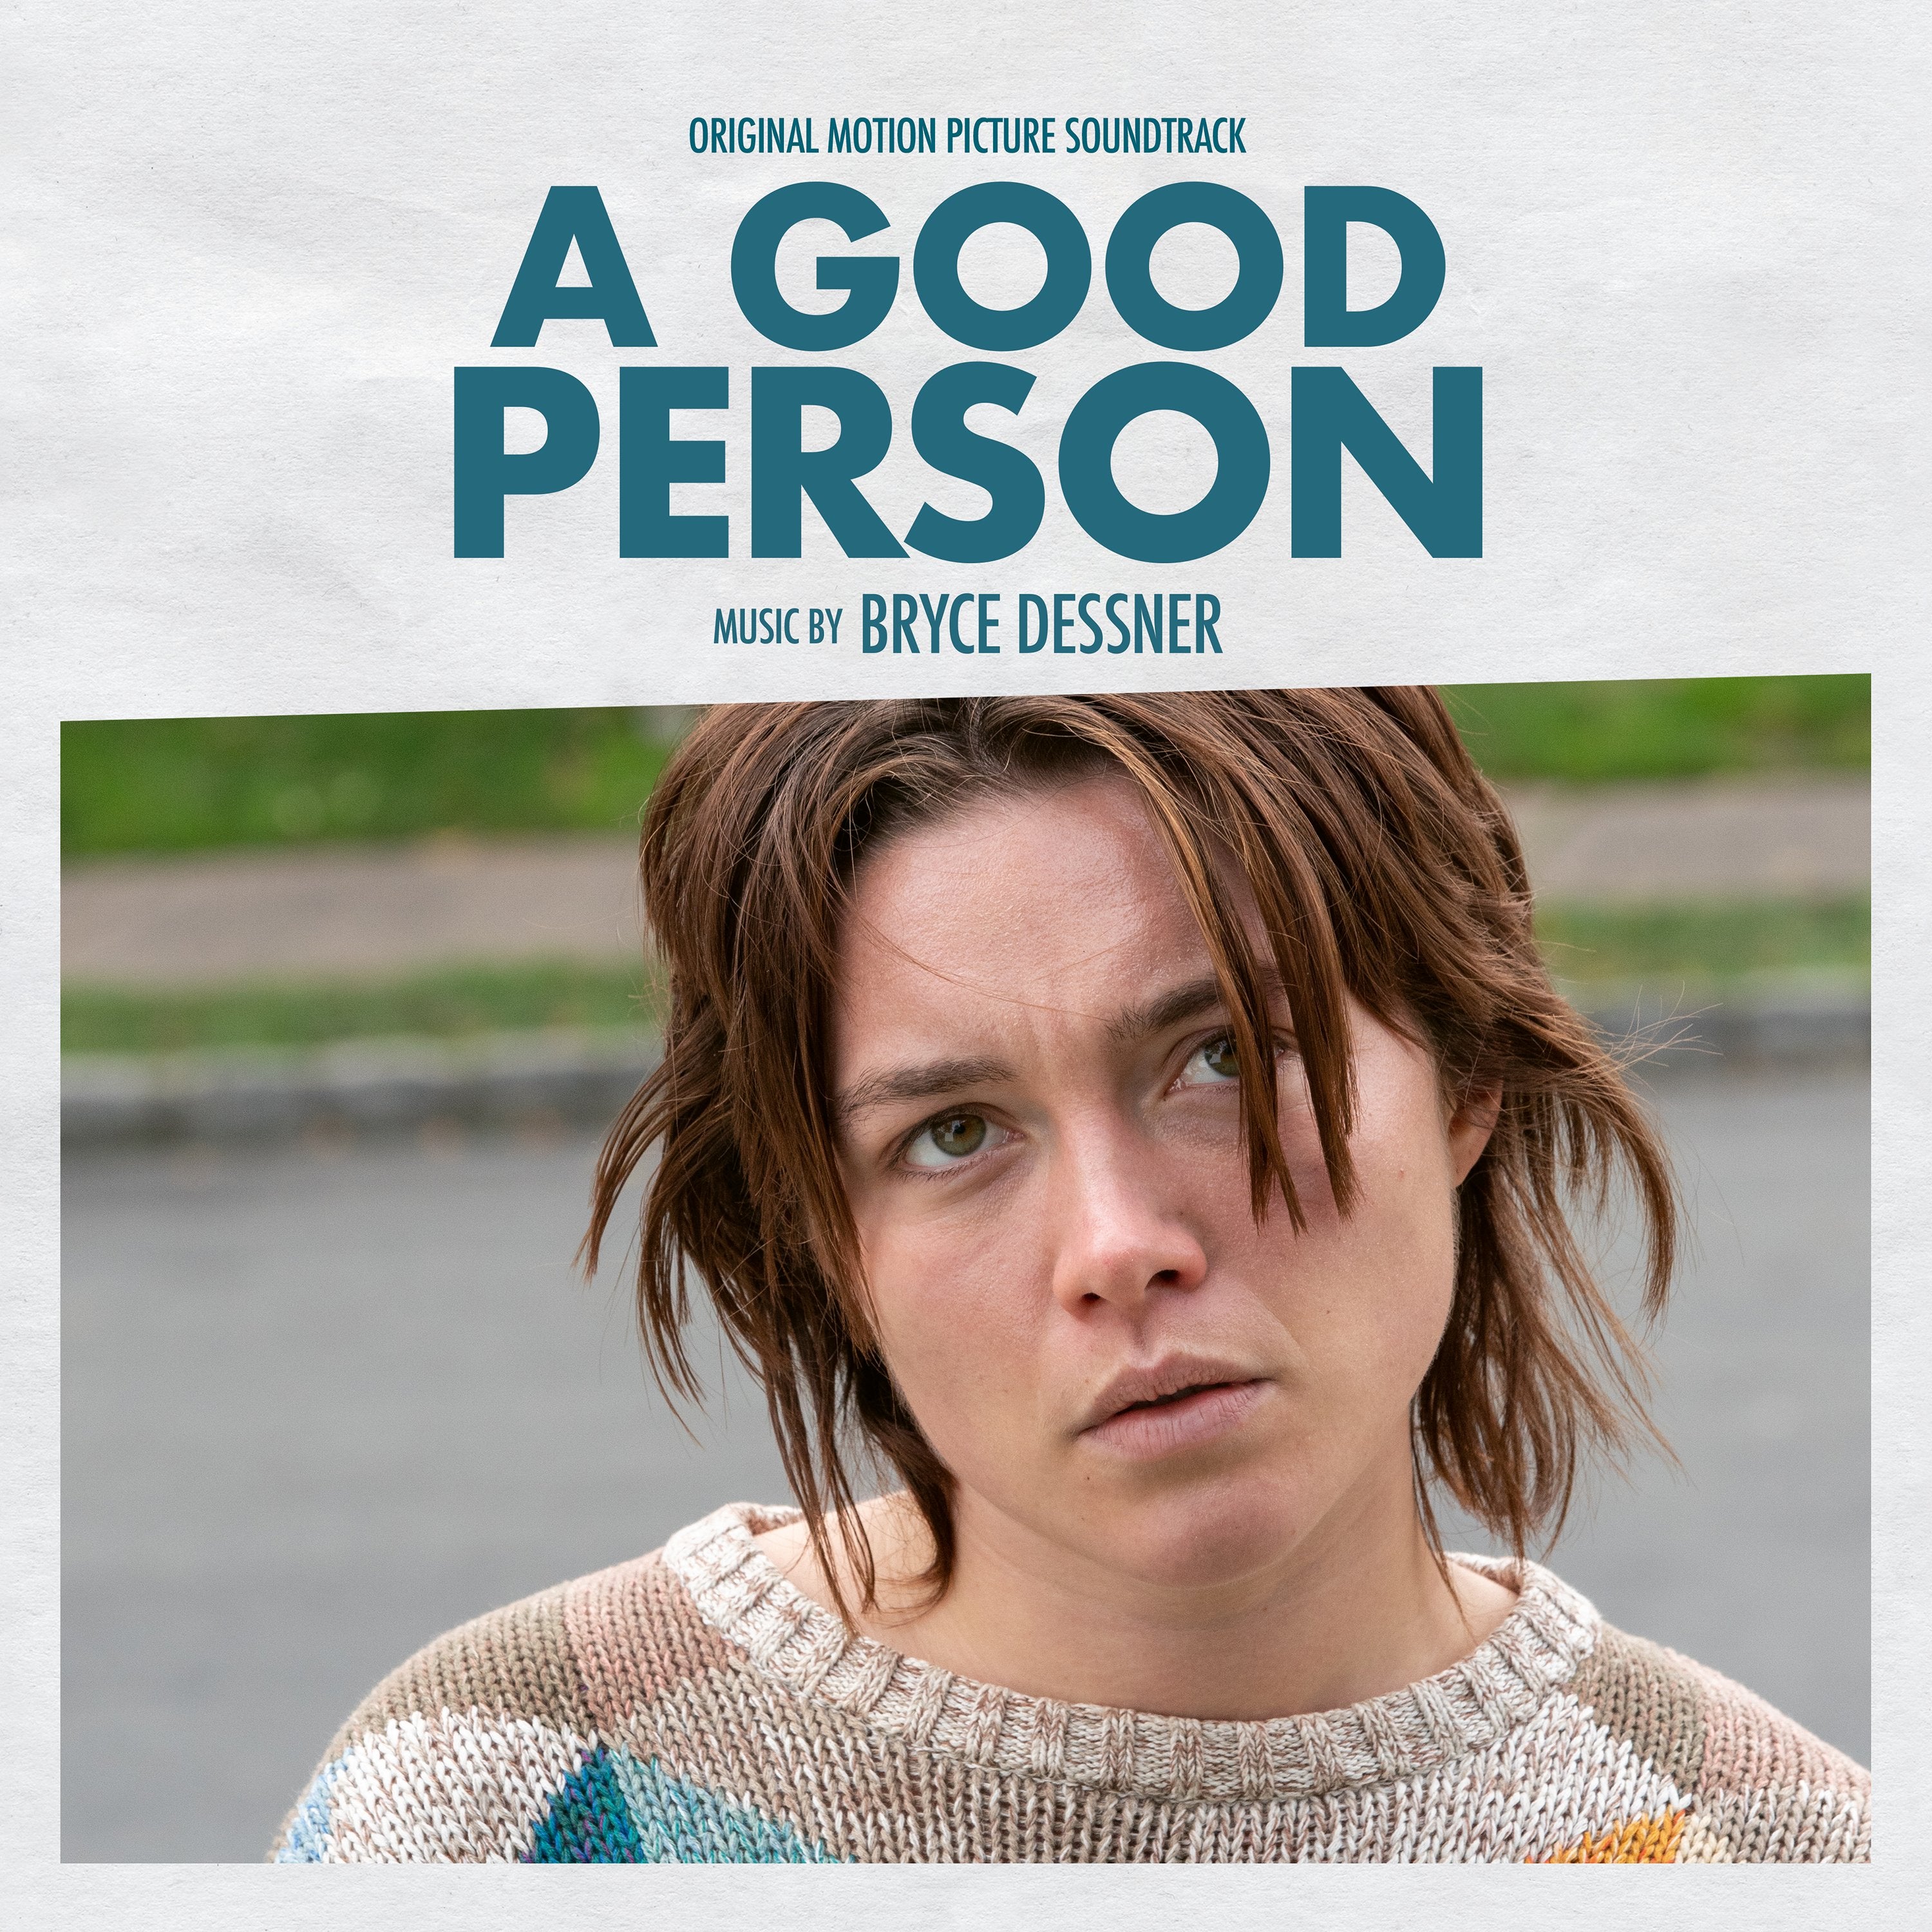 Bryce Dessner (The National) - A Good Person (Score): Vinyl LP